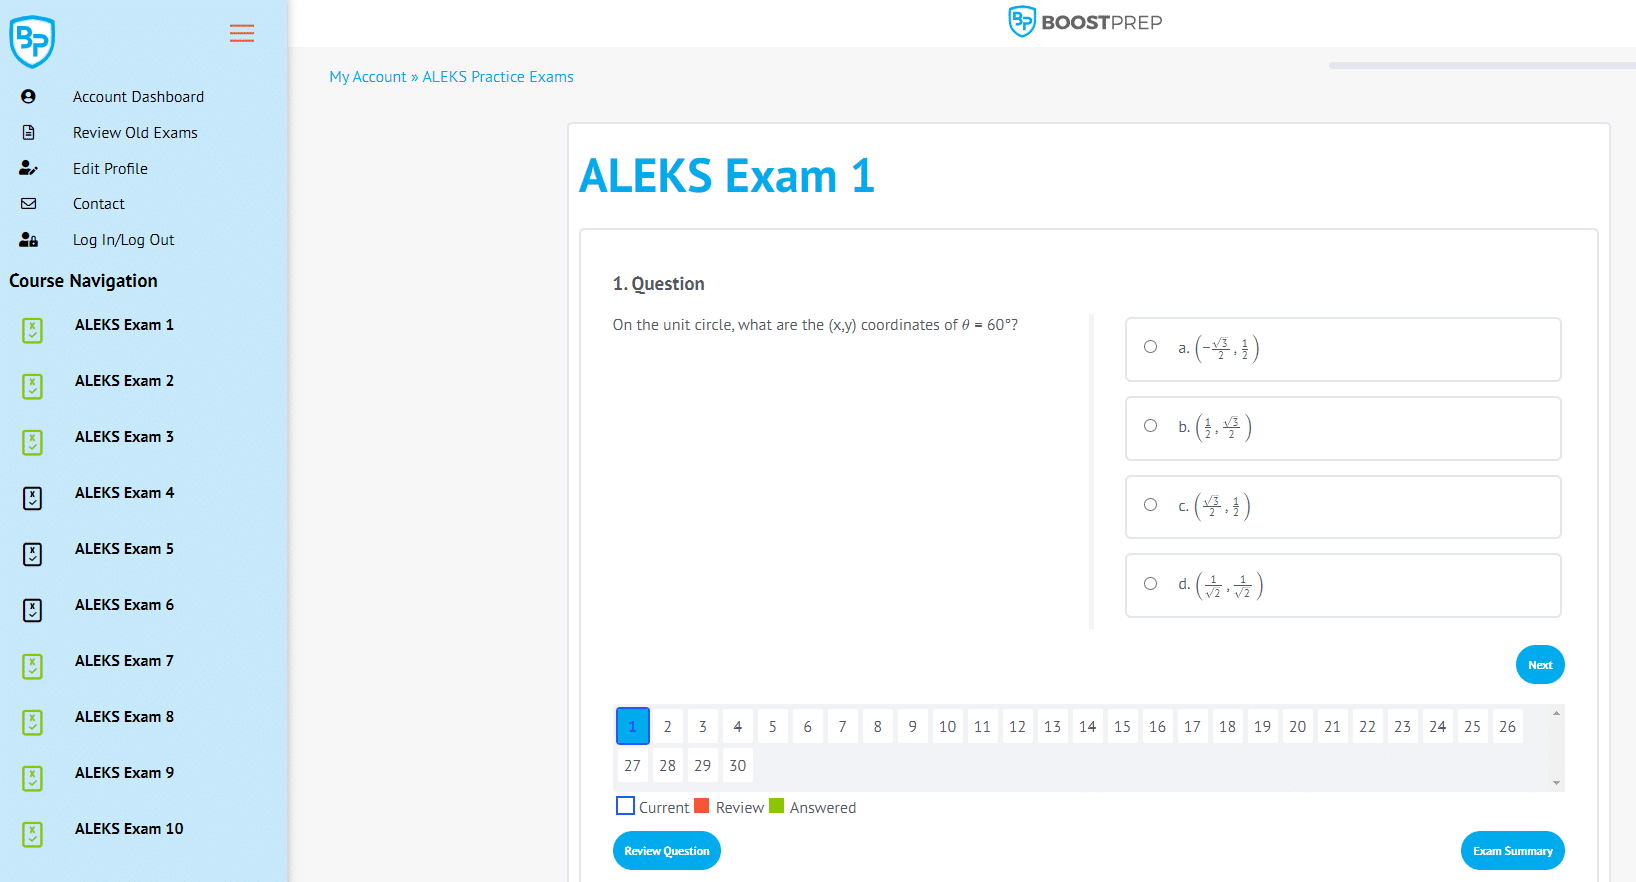 An image showing an example of our ALEKS practice exam